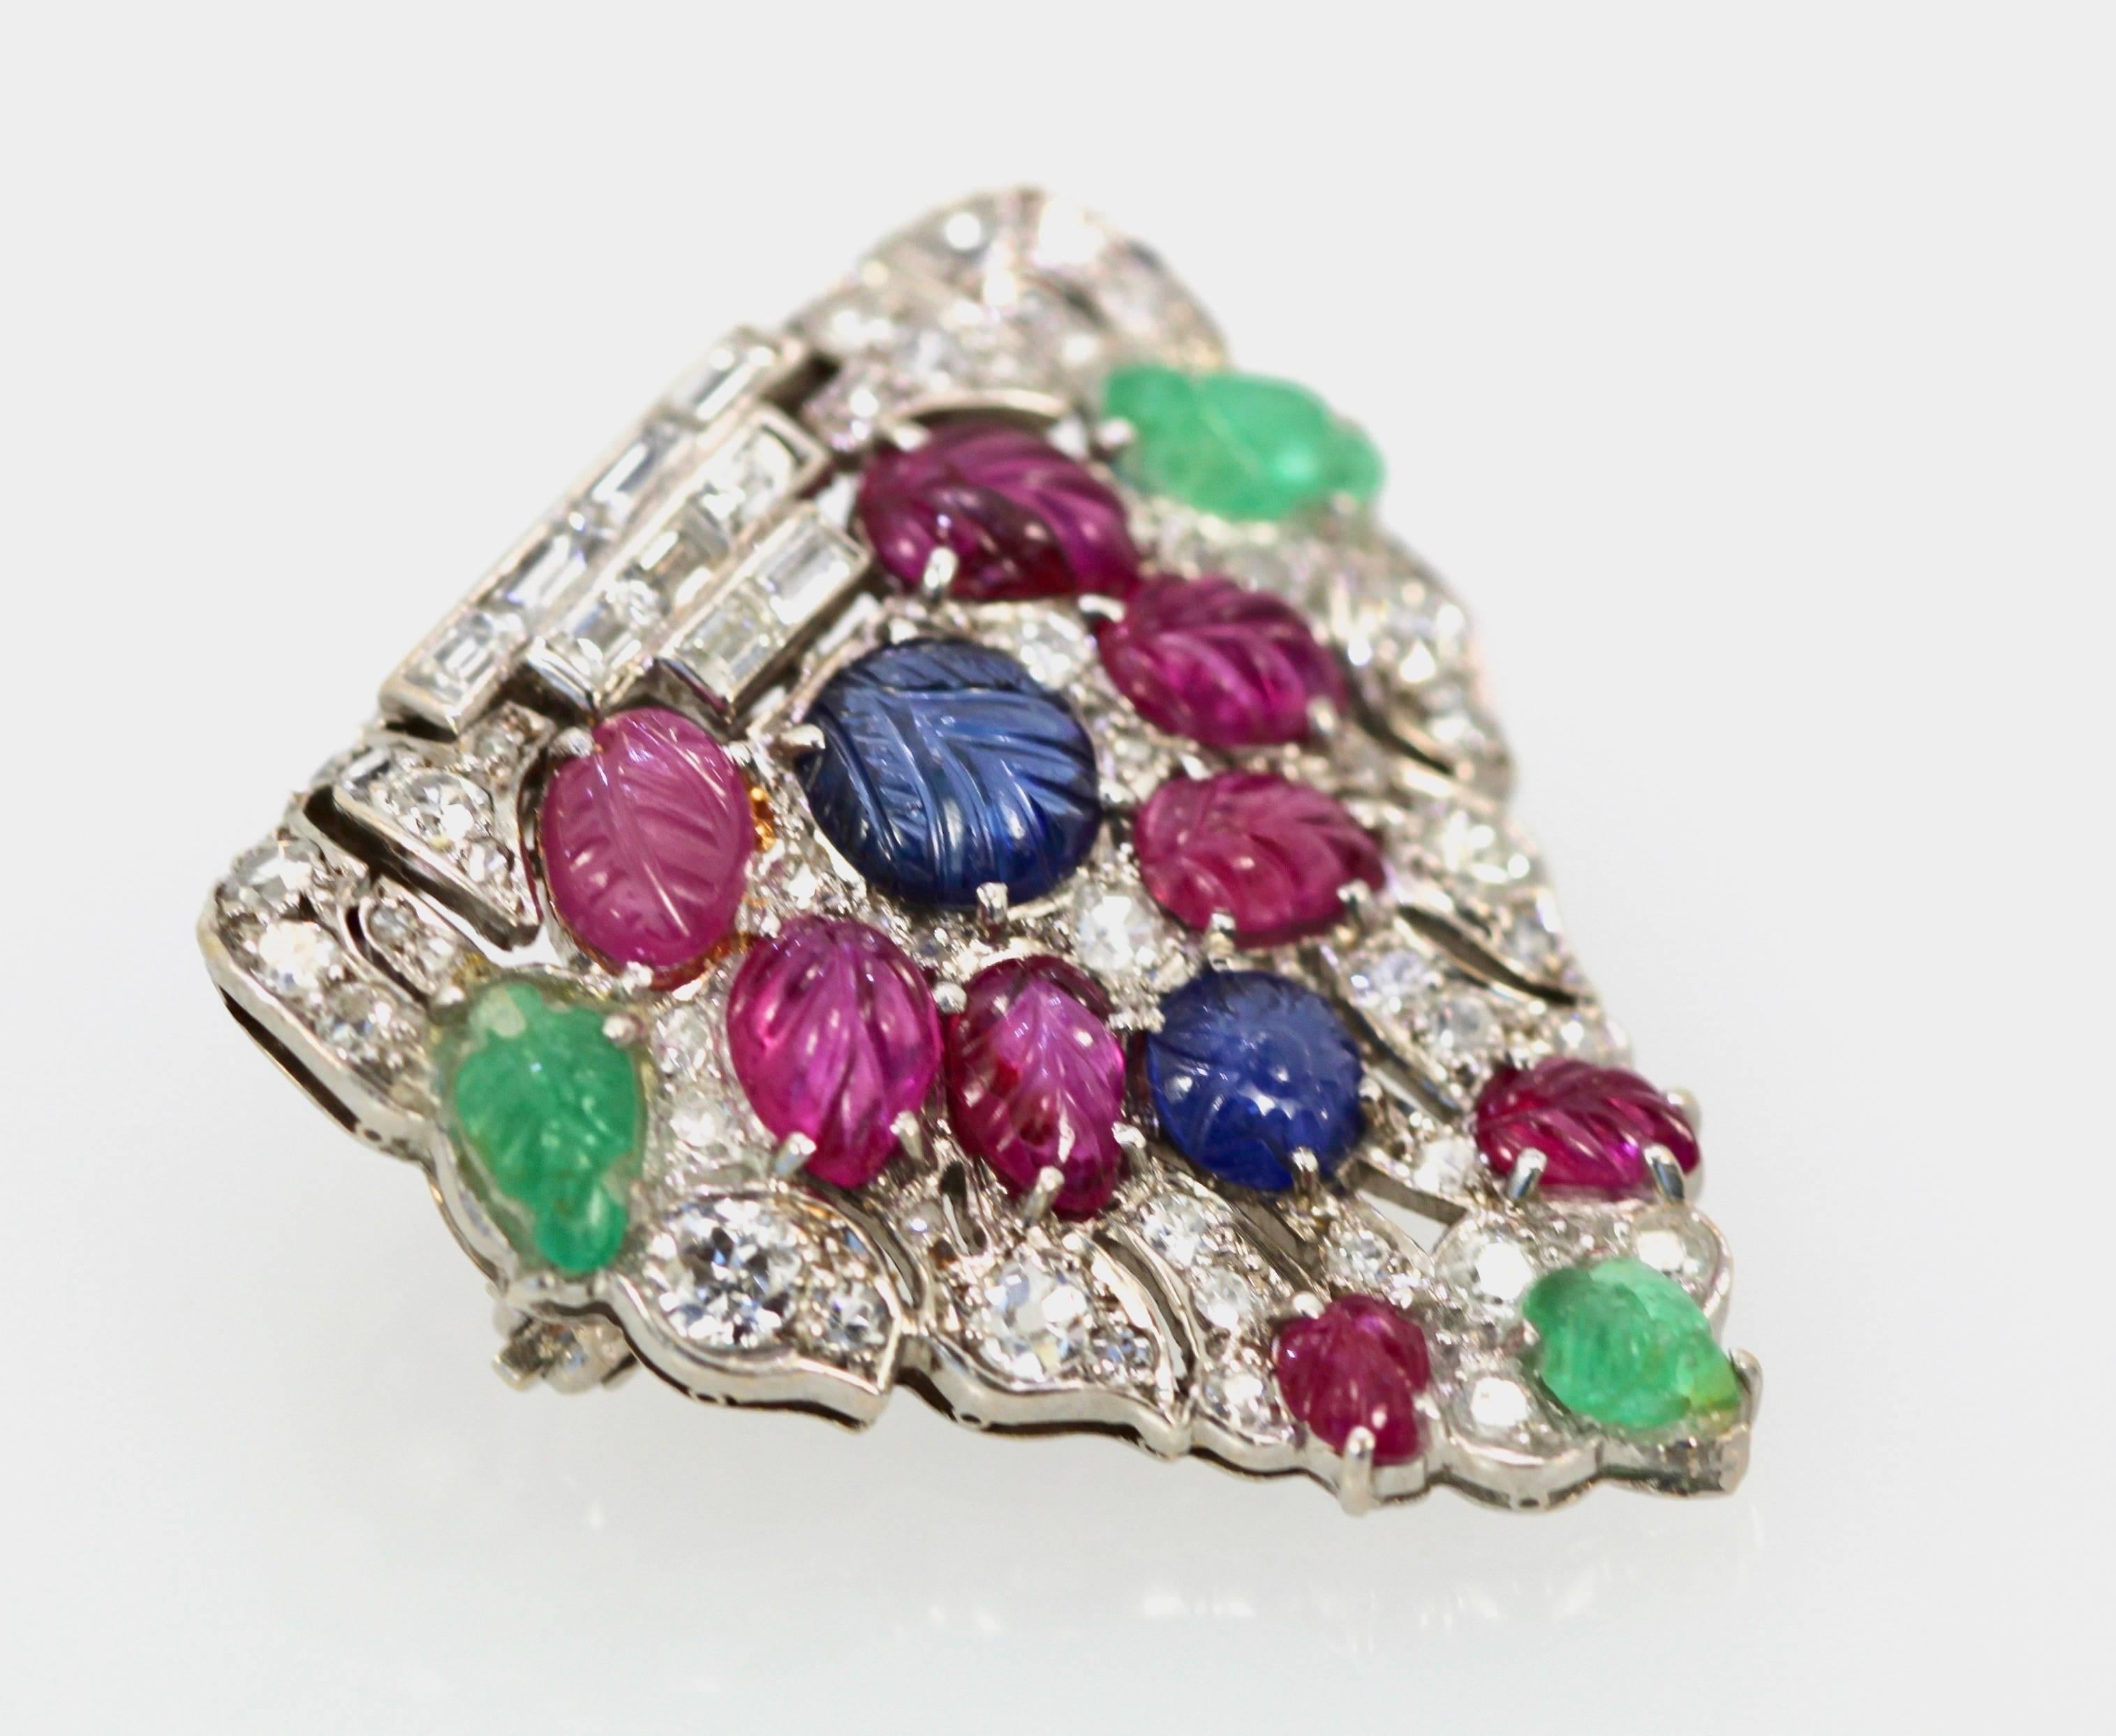 Art Deco Platinum Carved Ruby, Sapphire, Emerald and Diamond Pierced Shield Brooch

This Deco Platinum Brooch is in excellent condition. This is a pierced shield shaped Brooch is set with nine (9) baguette and 42 round and single cut Diamonds